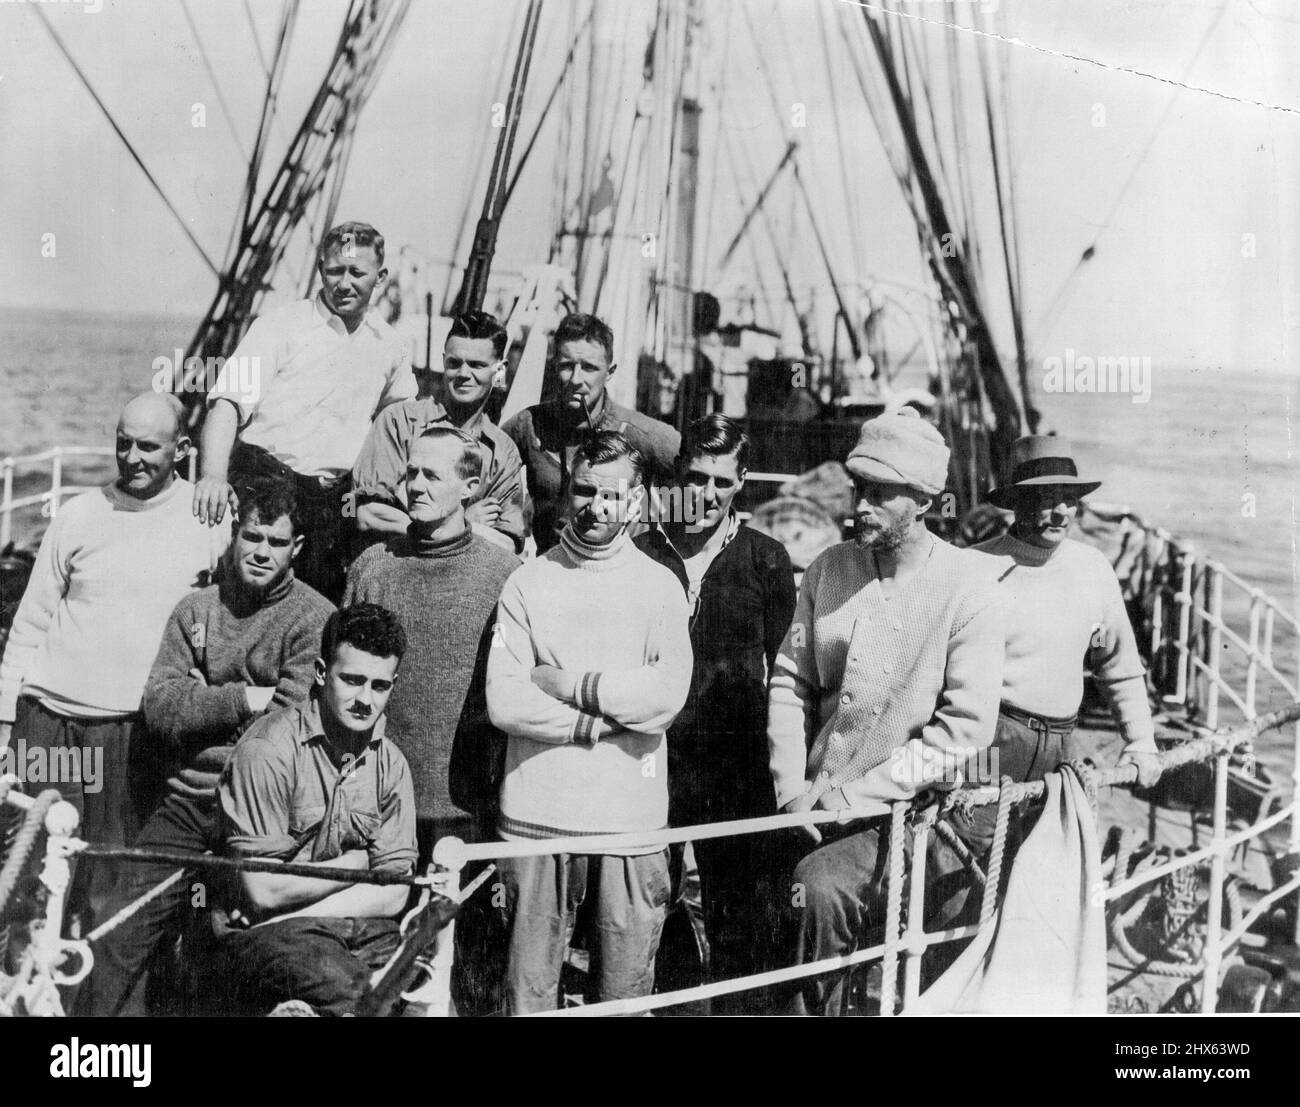 Home from Antarctic Seas: Members of the scientific staff of B.A.N.Z. Antarctic Research Expedition who arrived in Adelaide on 1 April after an extensive cruise in Antarctic and Sub-Antarctic Seas. Sitting in front ... A. Howard. First row L to R ... R. G. Simmers, Sir Douglas Mawson, Com. Morton H. Moyes. Back Row L to R .,.. H. O. Fketcher, R. A. Falla, S.A.C. Campbell. April 15, 1930. (Photo by Captain Frank Hurley, The Herald Feature Service). Stock Photo